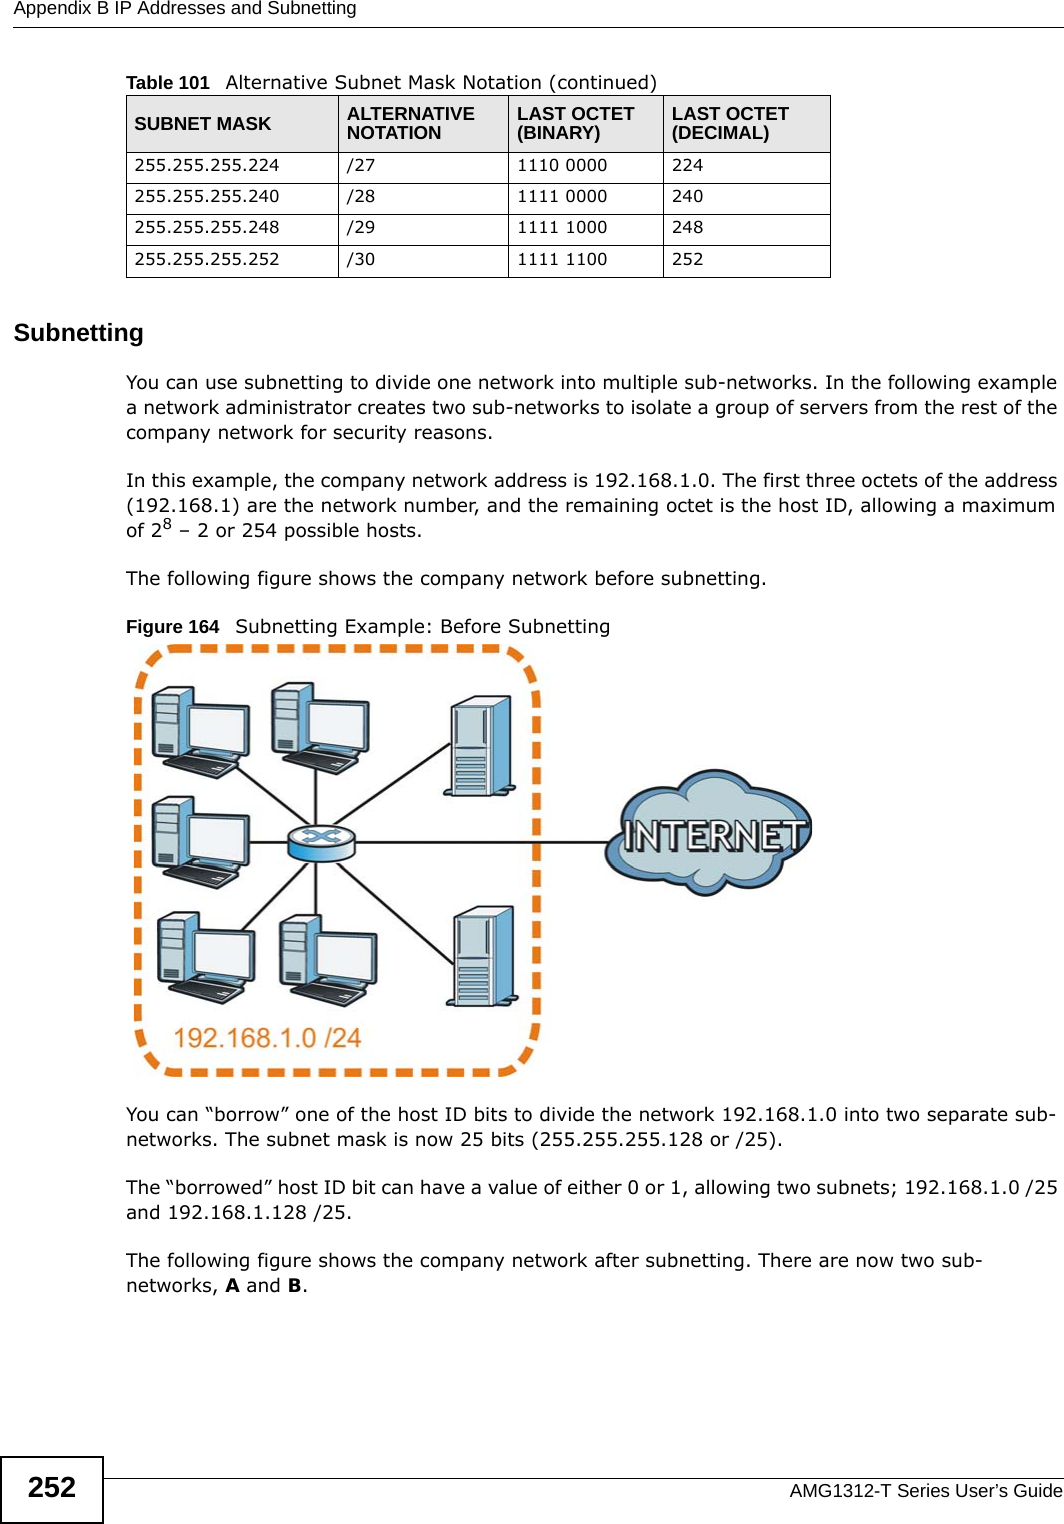 Appendix B IP Addresses and SubnettingAMG1312-T Series User’s Guide252SubnettingYou can use subnetting to divide one network into multiple sub-networks. In the following example a network administrator creates two sub-networks to isolate a group of servers from the rest of the company network for security reasons.In this example, the company network address is 192.168.1.0. The first three octets of the address (192.168.1) are the network number, and the remaining octet is the host ID, allowing a maximum of 28 – 2 or 254 possible hosts.The following figure shows the company network before subnetting.  Figure 164   Subnetting Example: Before SubnettingYou can “borrow” one of the host ID bits to divide the network 192.168.1.0 into two separate sub-networks. The subnet mask is now 25 bits (255.255.255.128 or /25).The “borrowed” host ID bit can have a value of either 0 or 1, allowing two subnets; 192.168.1.0 /25 and 192.168.1.128 /25. The following figure shows the company network after subnetting. There are now two sub-networks, A and B. 255.255.255.224 /27 1110 0000 224255.255.255.240 /28 1111 0000 240255.255.255.248 /29 1111 1000 248255.255.255.252 /30 1111 1100 252Table 101   Alternative Subnet Mask Notation (continued)SUBNET MASK ALTERNATIVE NOTATION LAST OCTET (BINARY) LAST OCTET (DECIMAL)